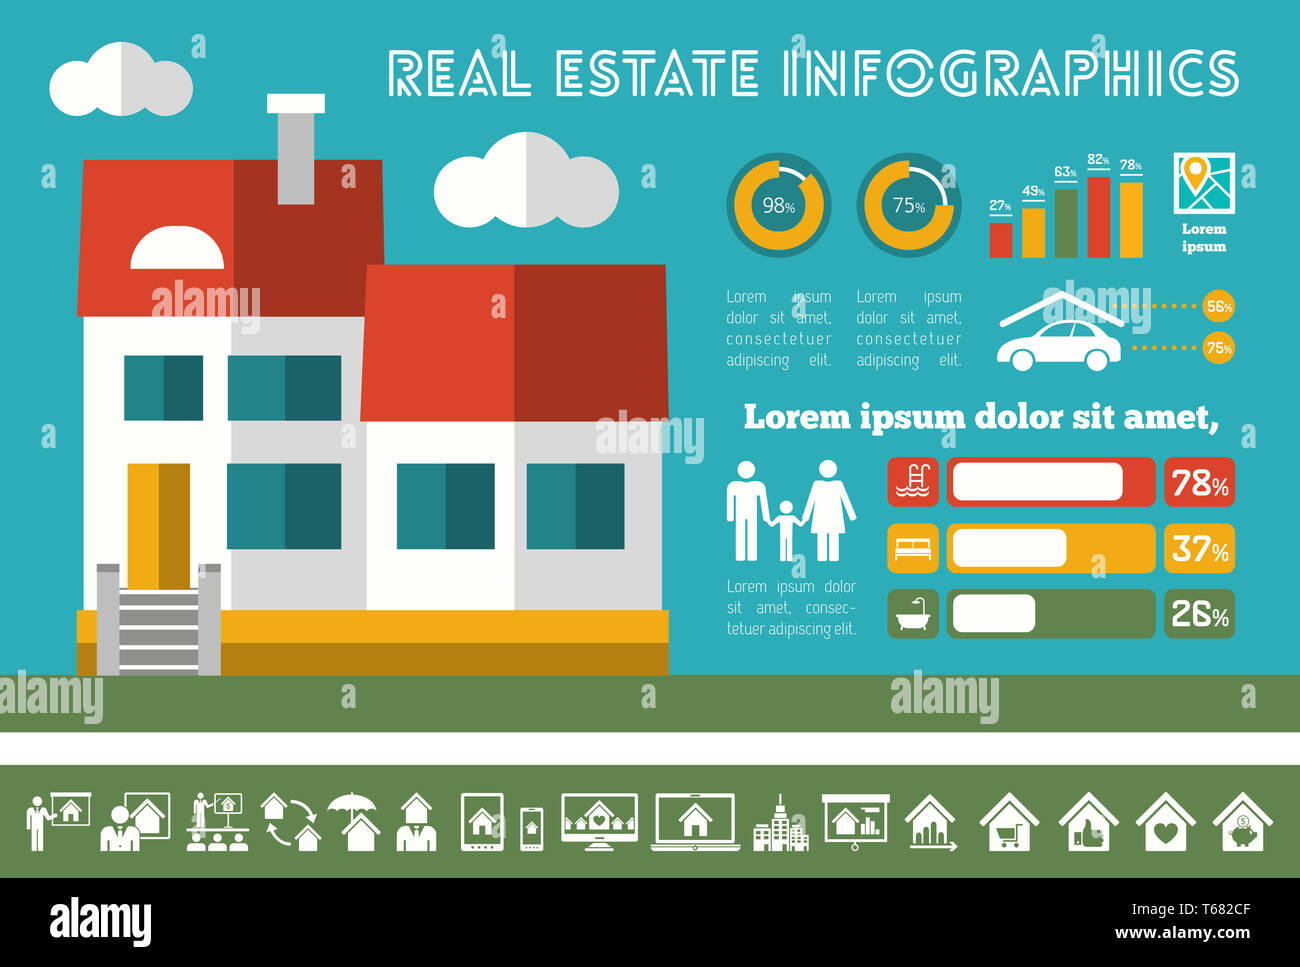 Real Estate Infographics. Foto Stock